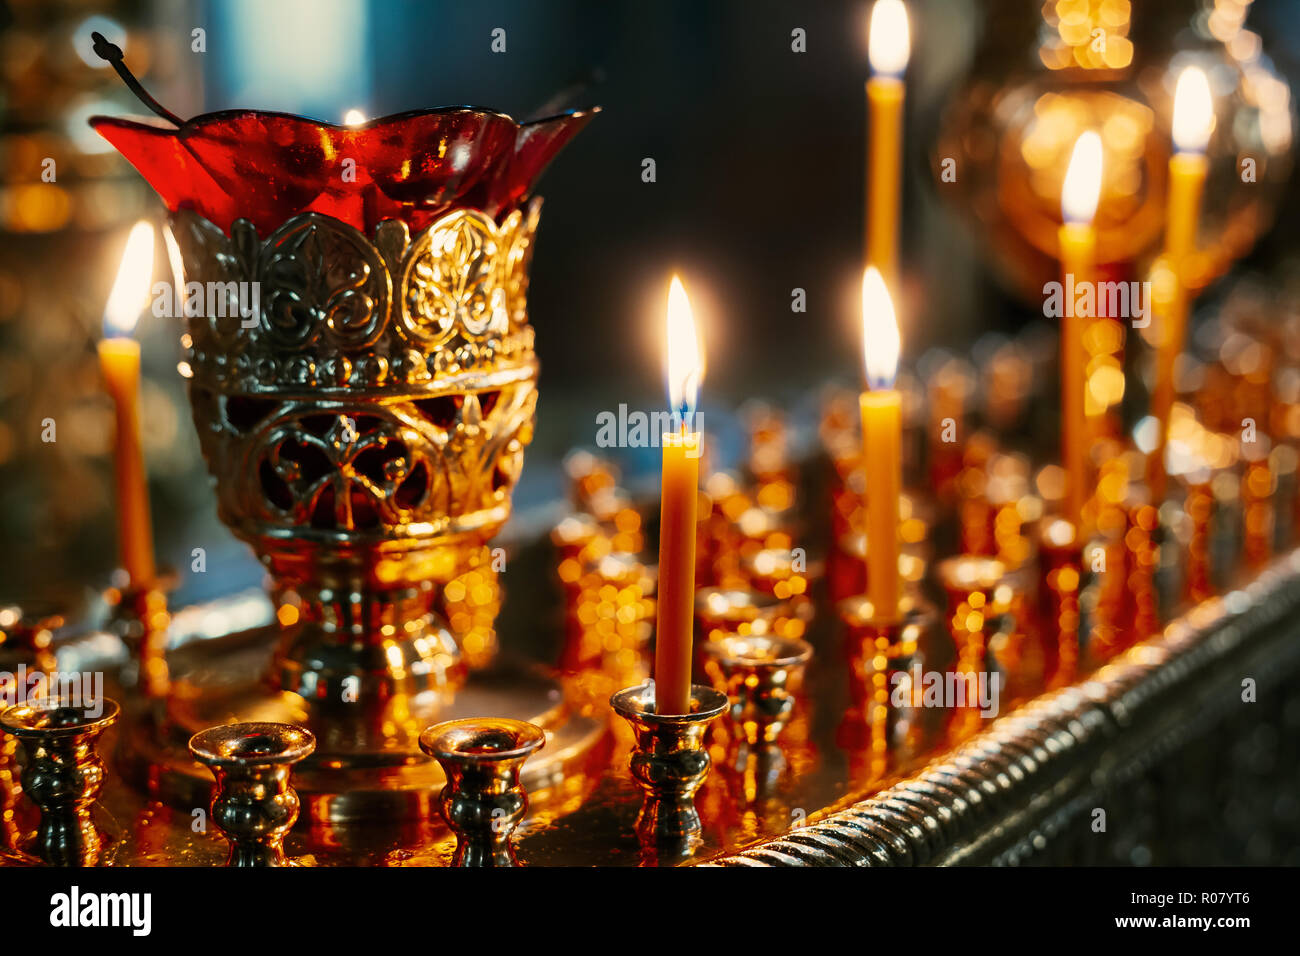 Row Candles In Church. Candle Light Flame In Worship. Stock Photo